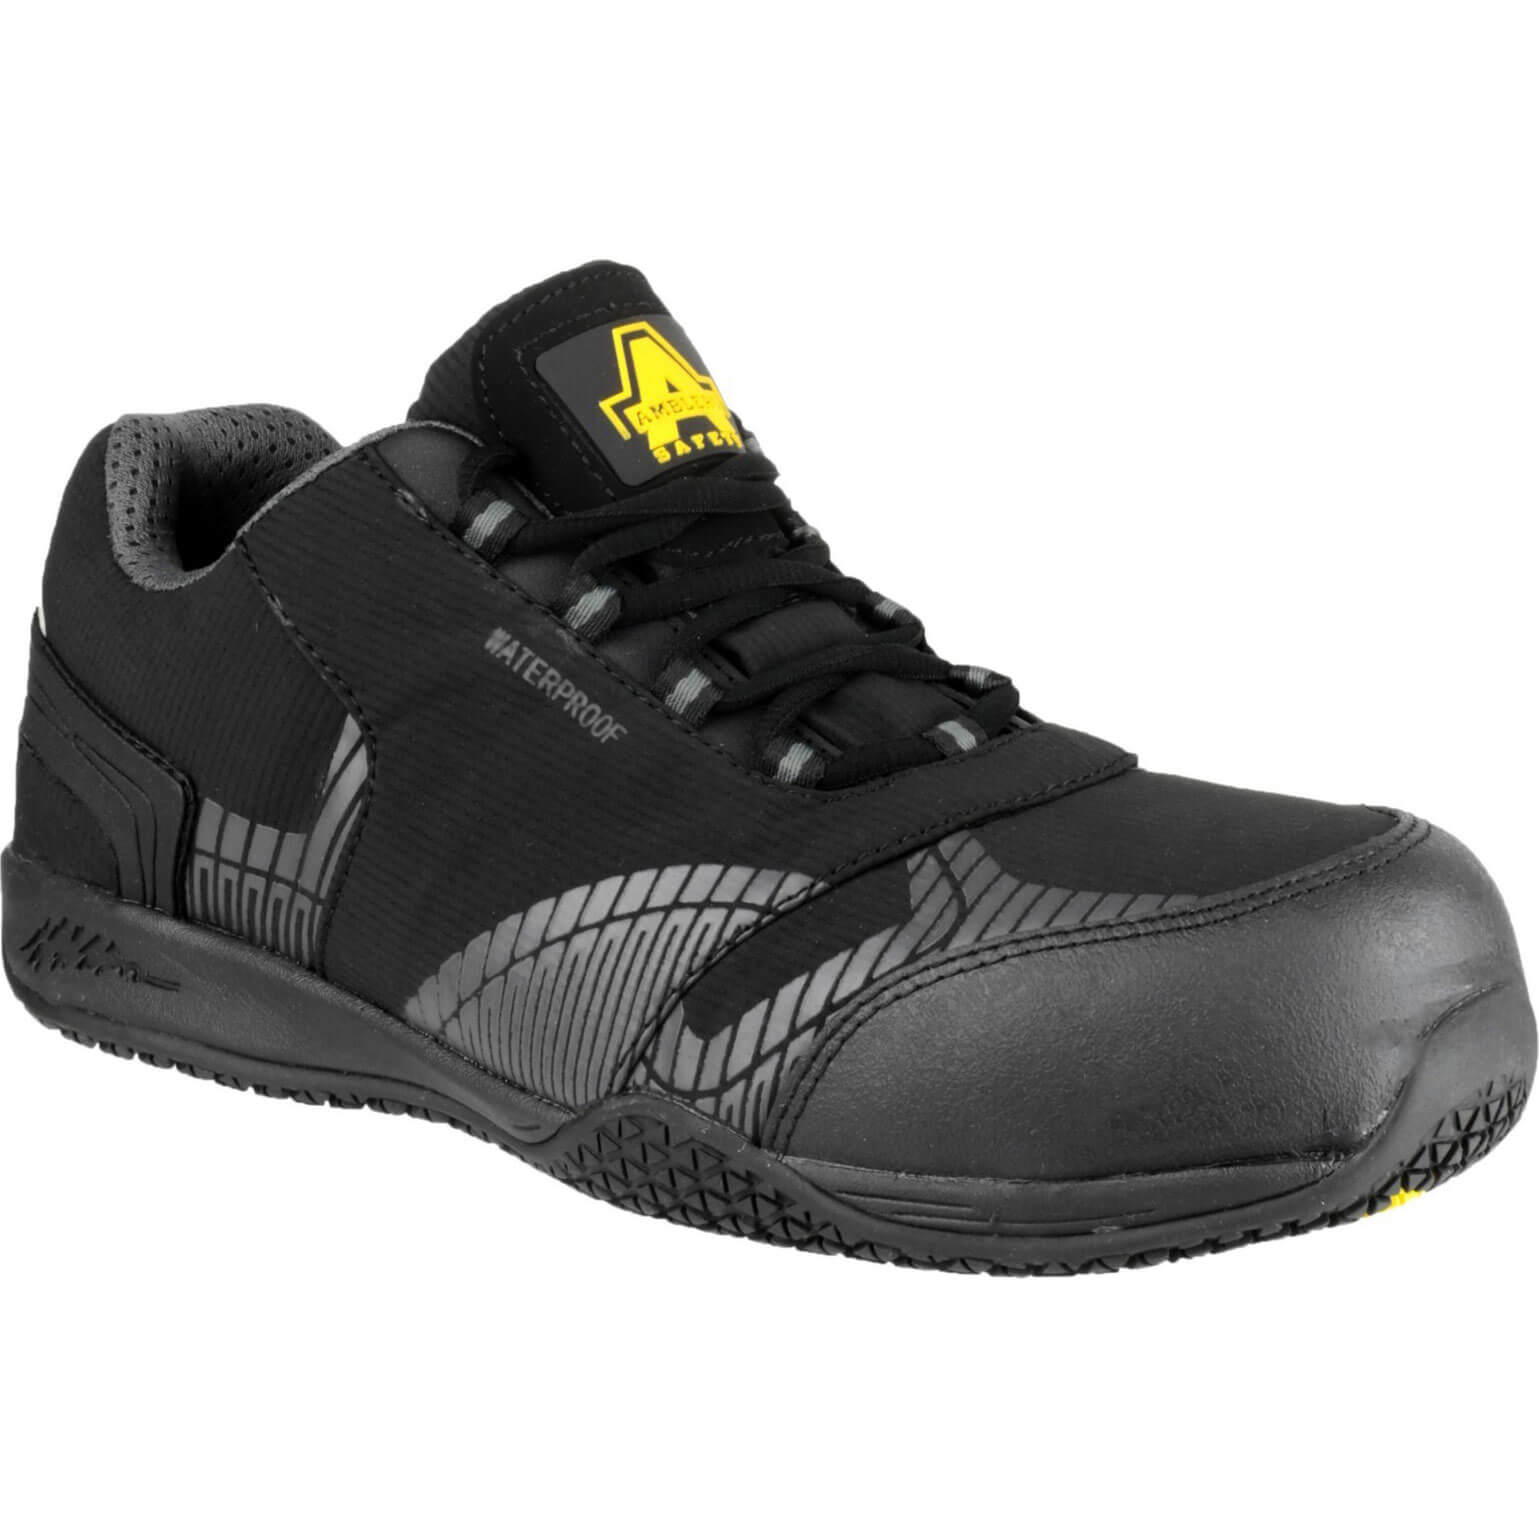 Image of Amblers Safety FS29C Waterproof Metal Free Non Leather Safety Trainer Black Size 12